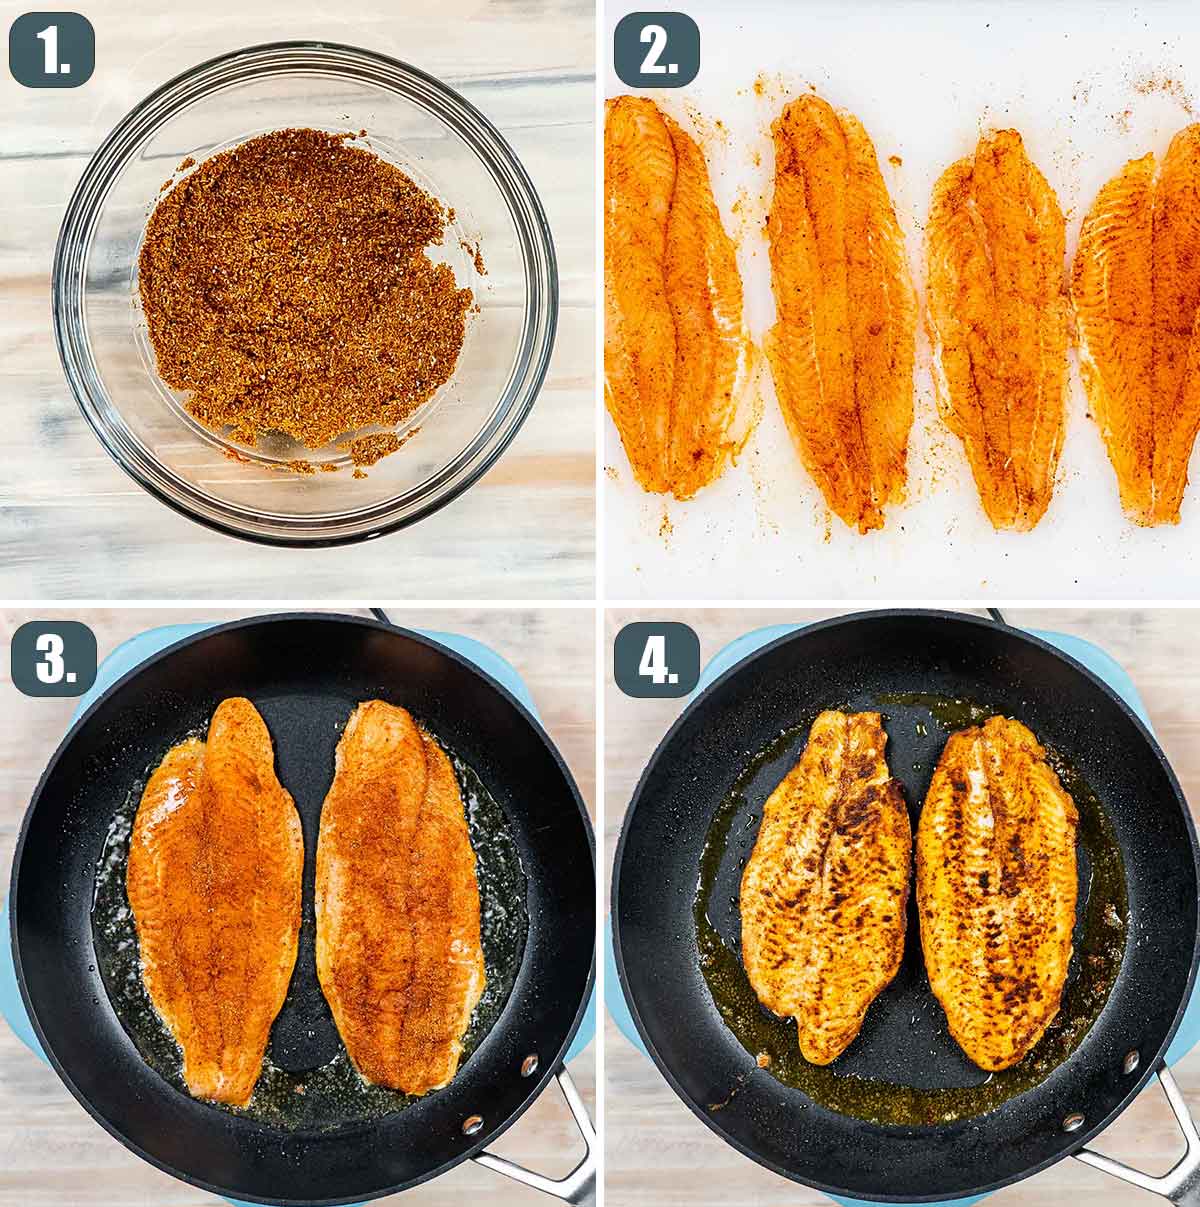 detailed process shots showing how to make blackened fish.